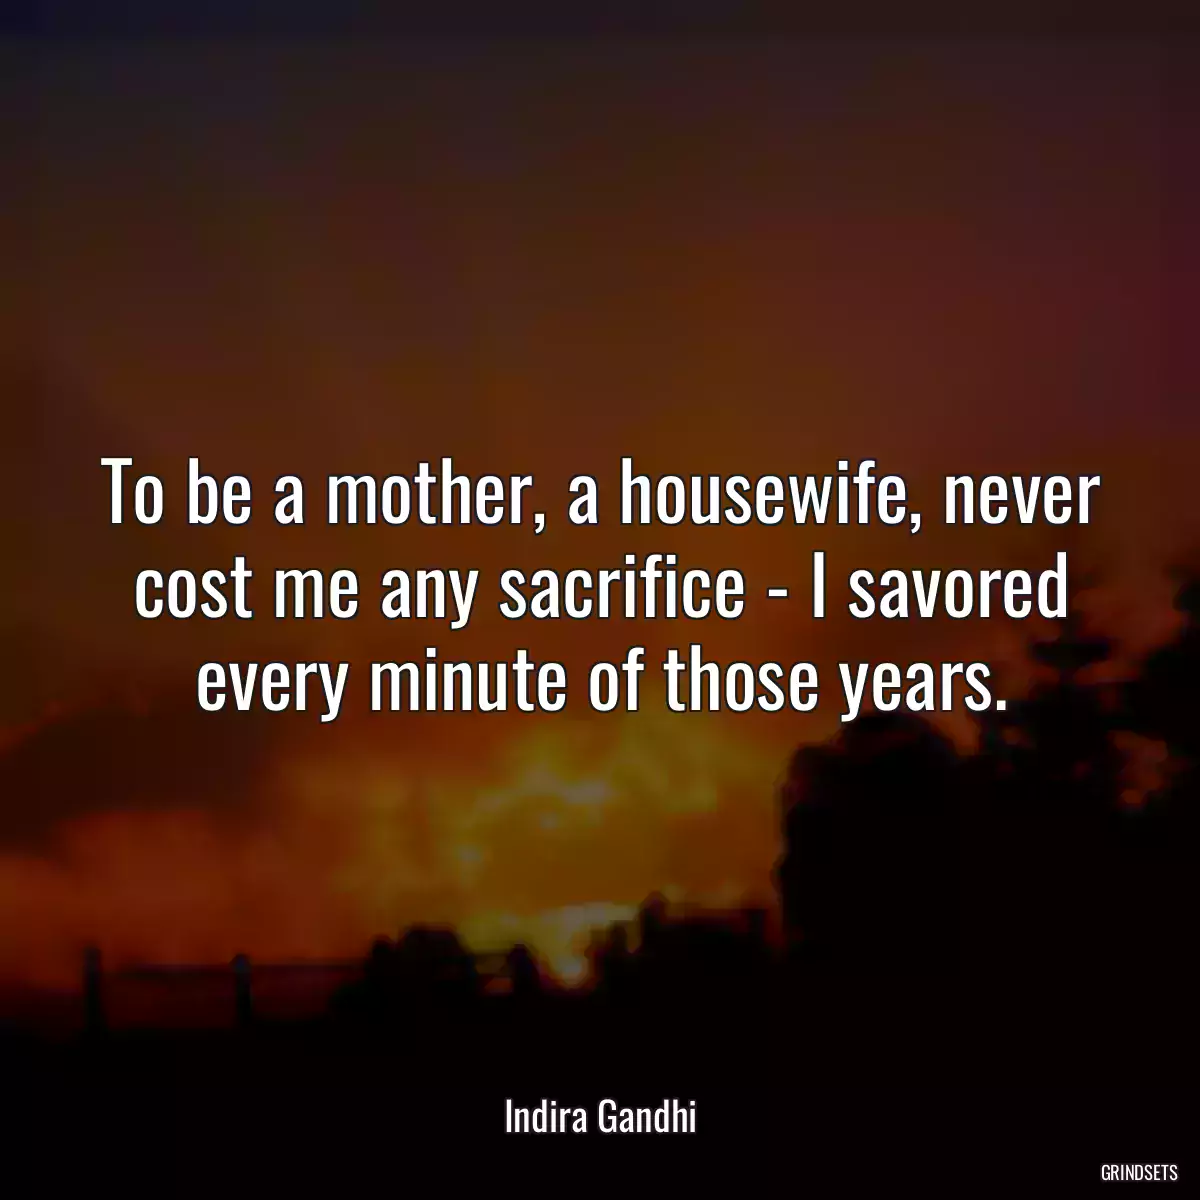 To be a mother, a housewife, never cost me any sacrifice - I savored every minute of those years.